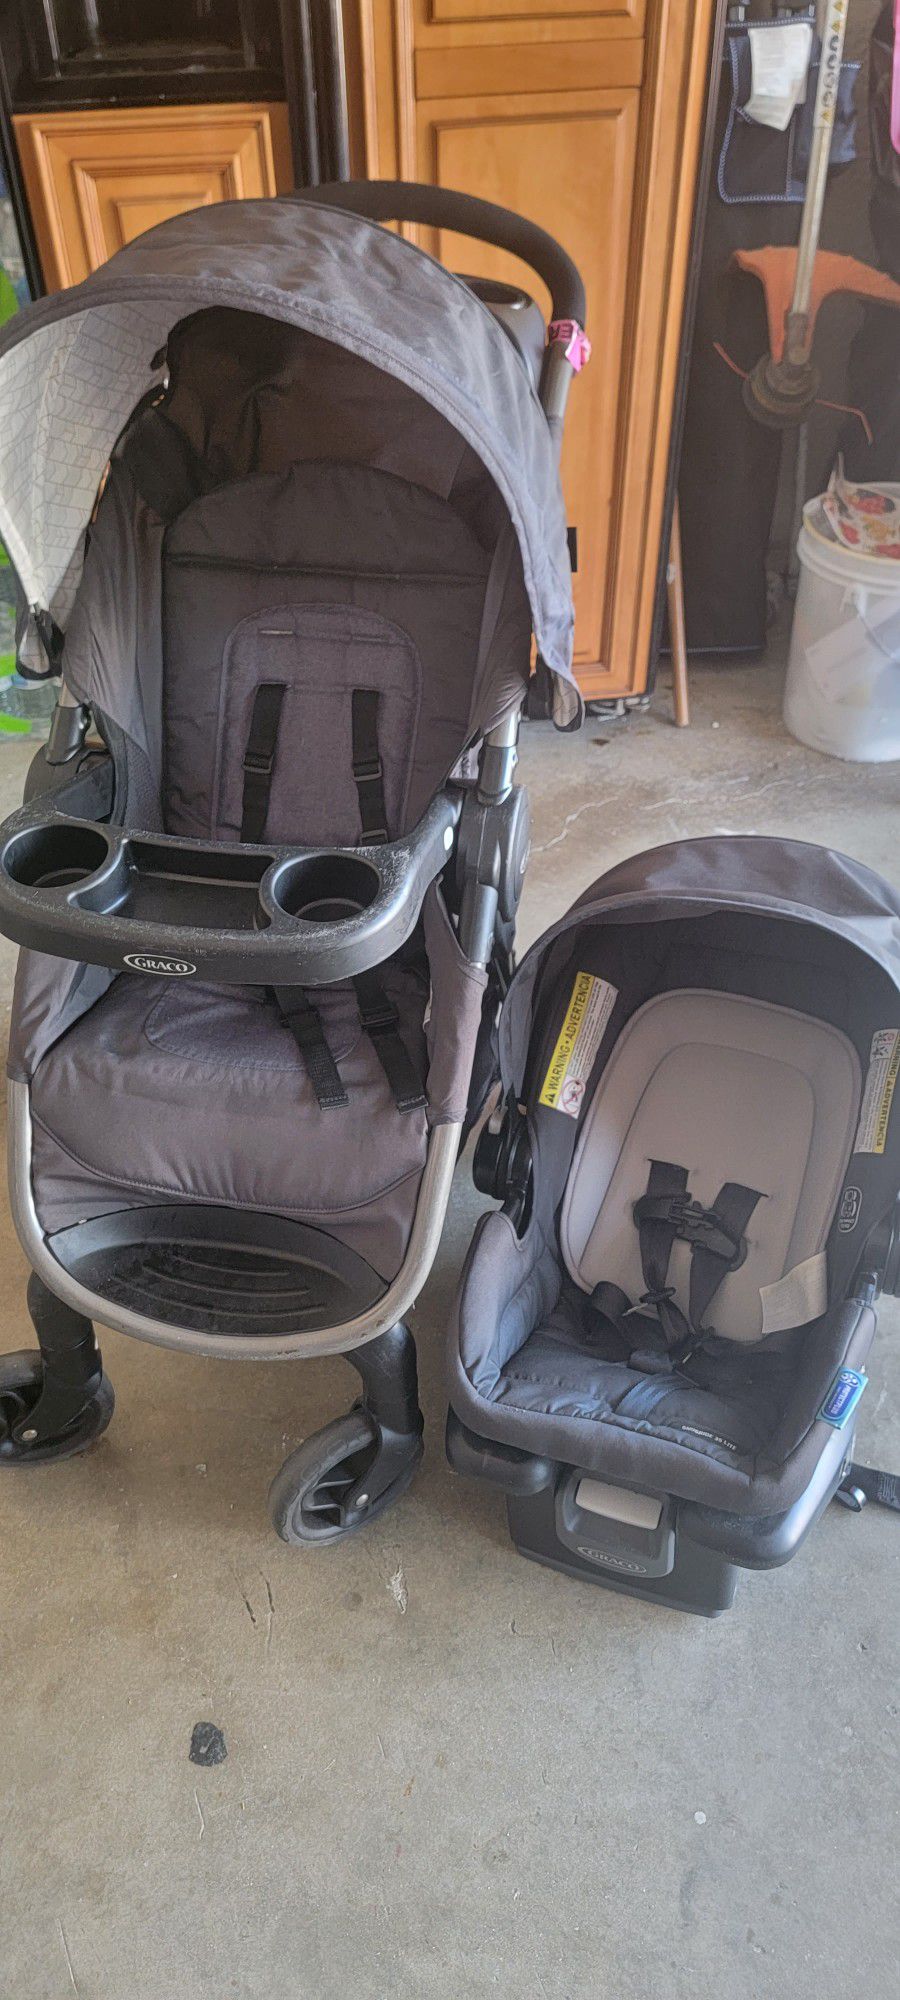 Graco Travel SysTem Carseat/stroller 